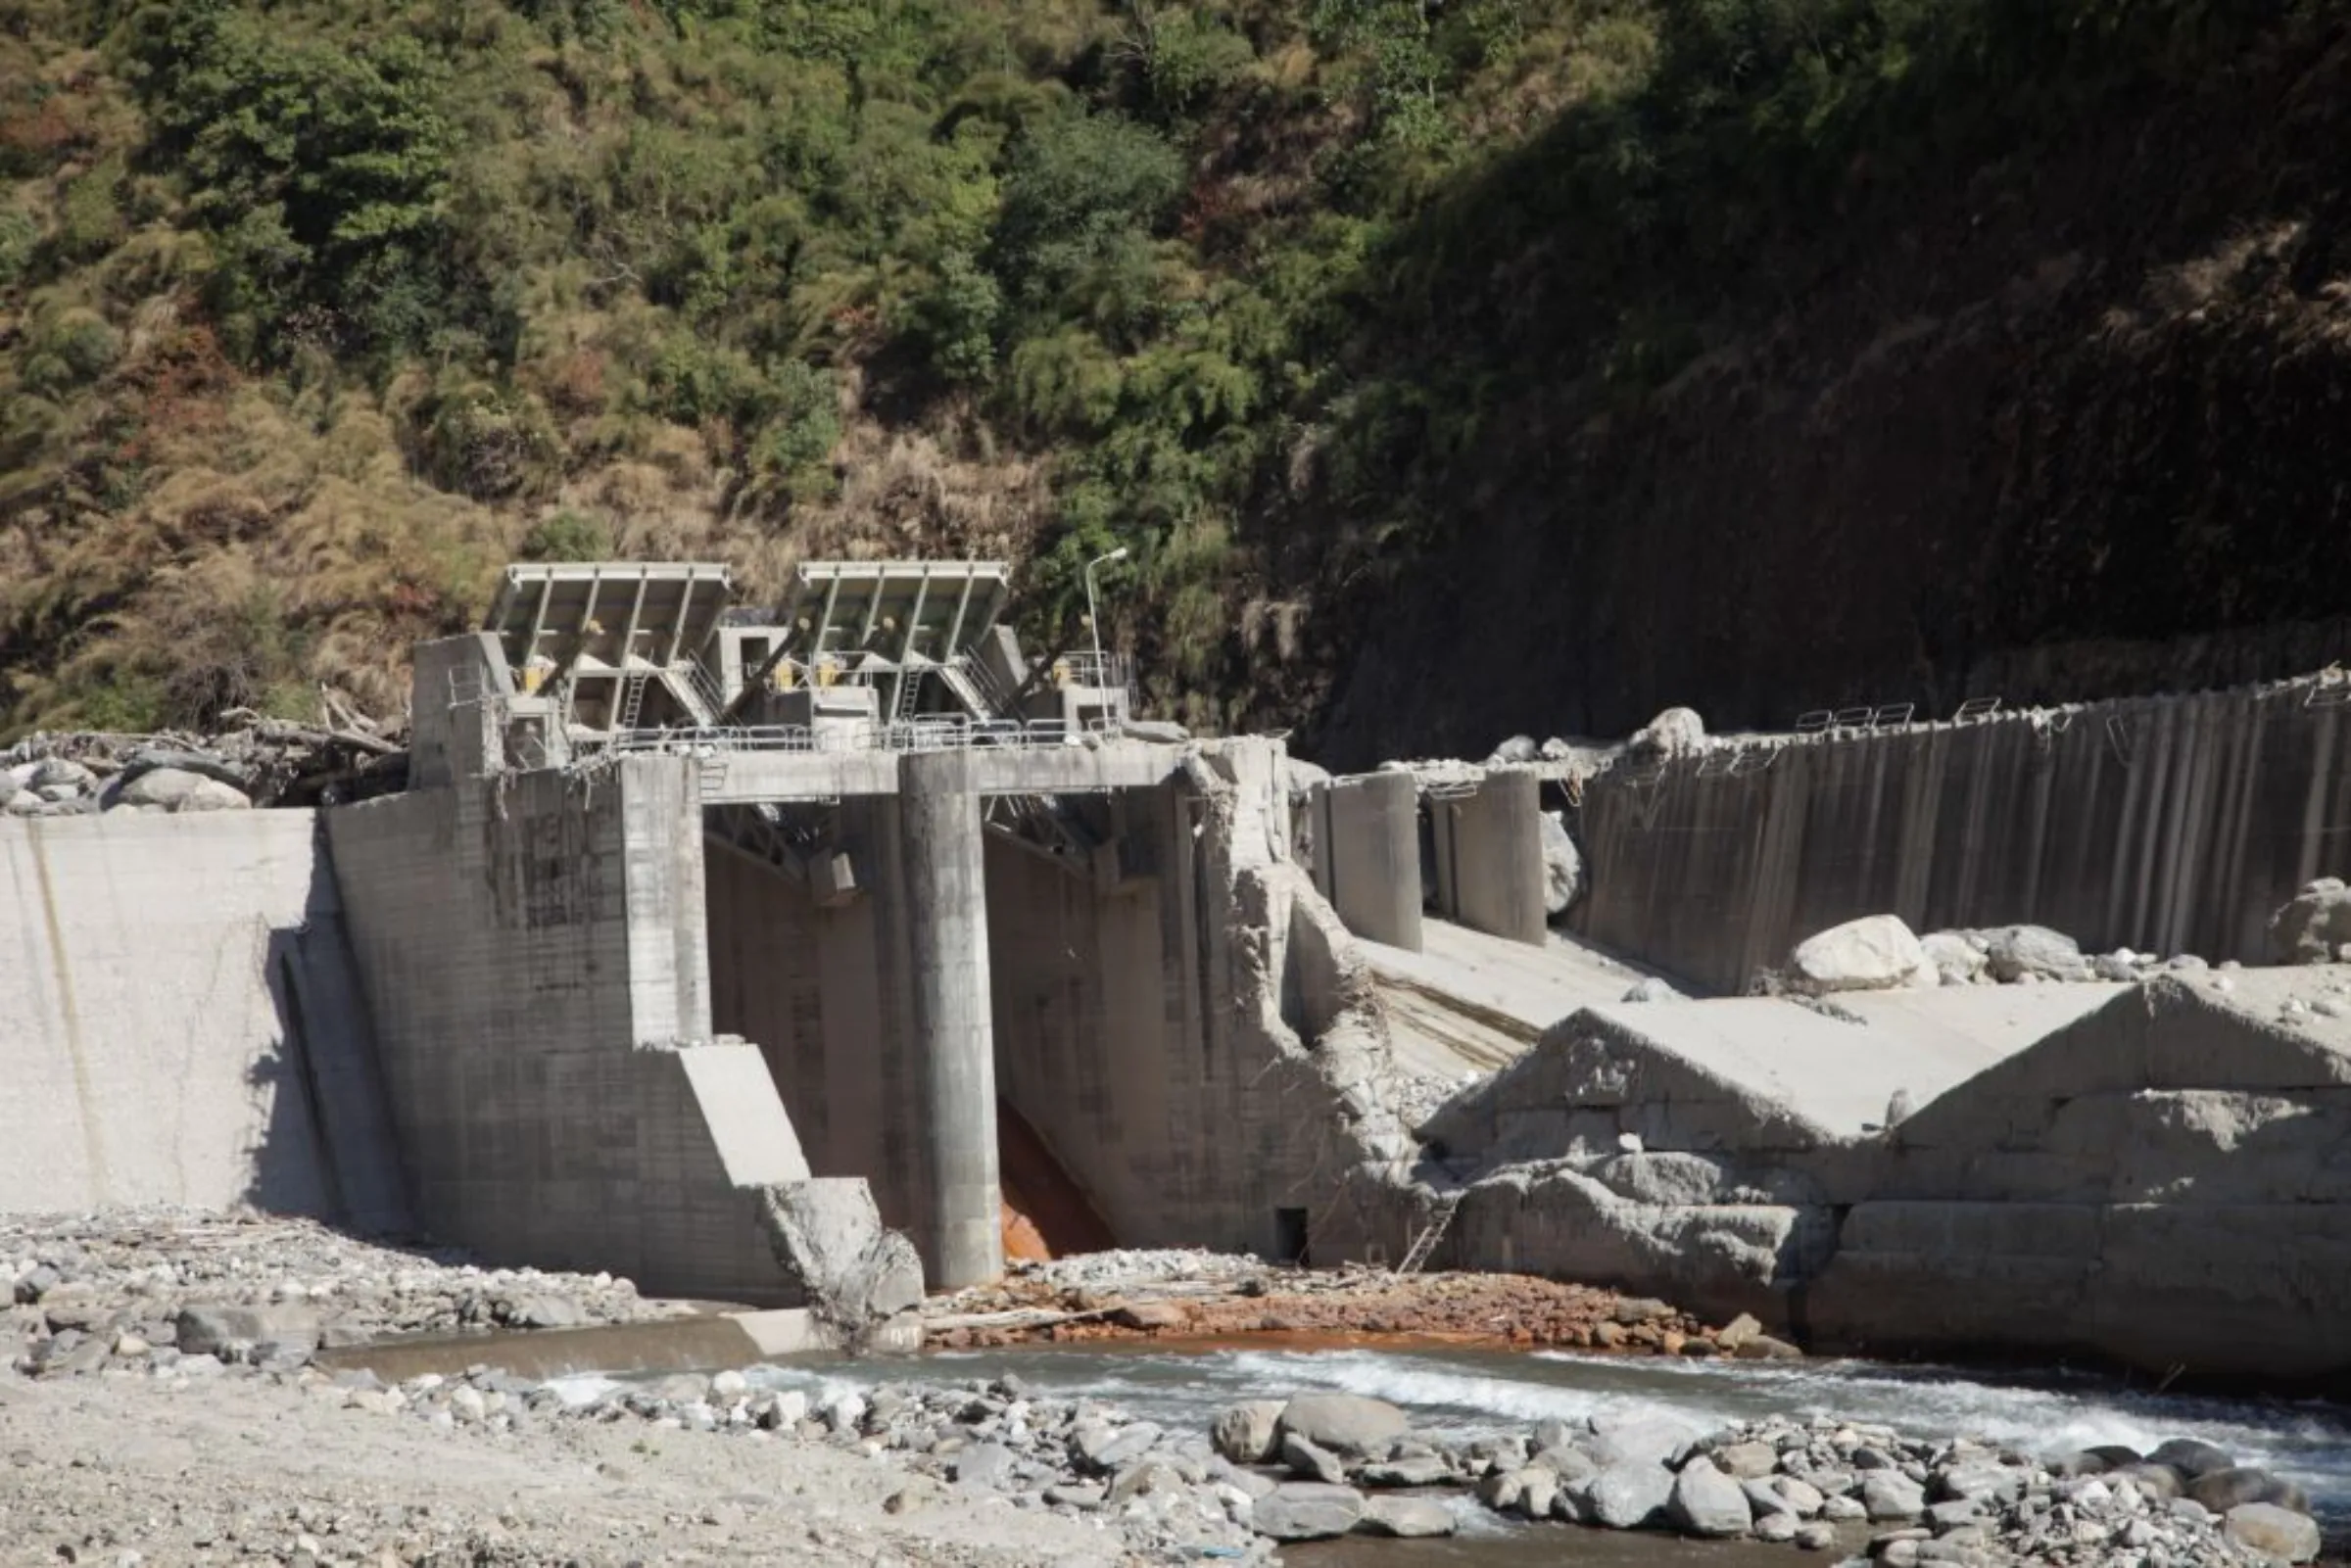 A view of the damaged Bhotekoshi hydropower dam after damage by a glacial lake outburst flood in 2016. Photo taken December 25, 2016